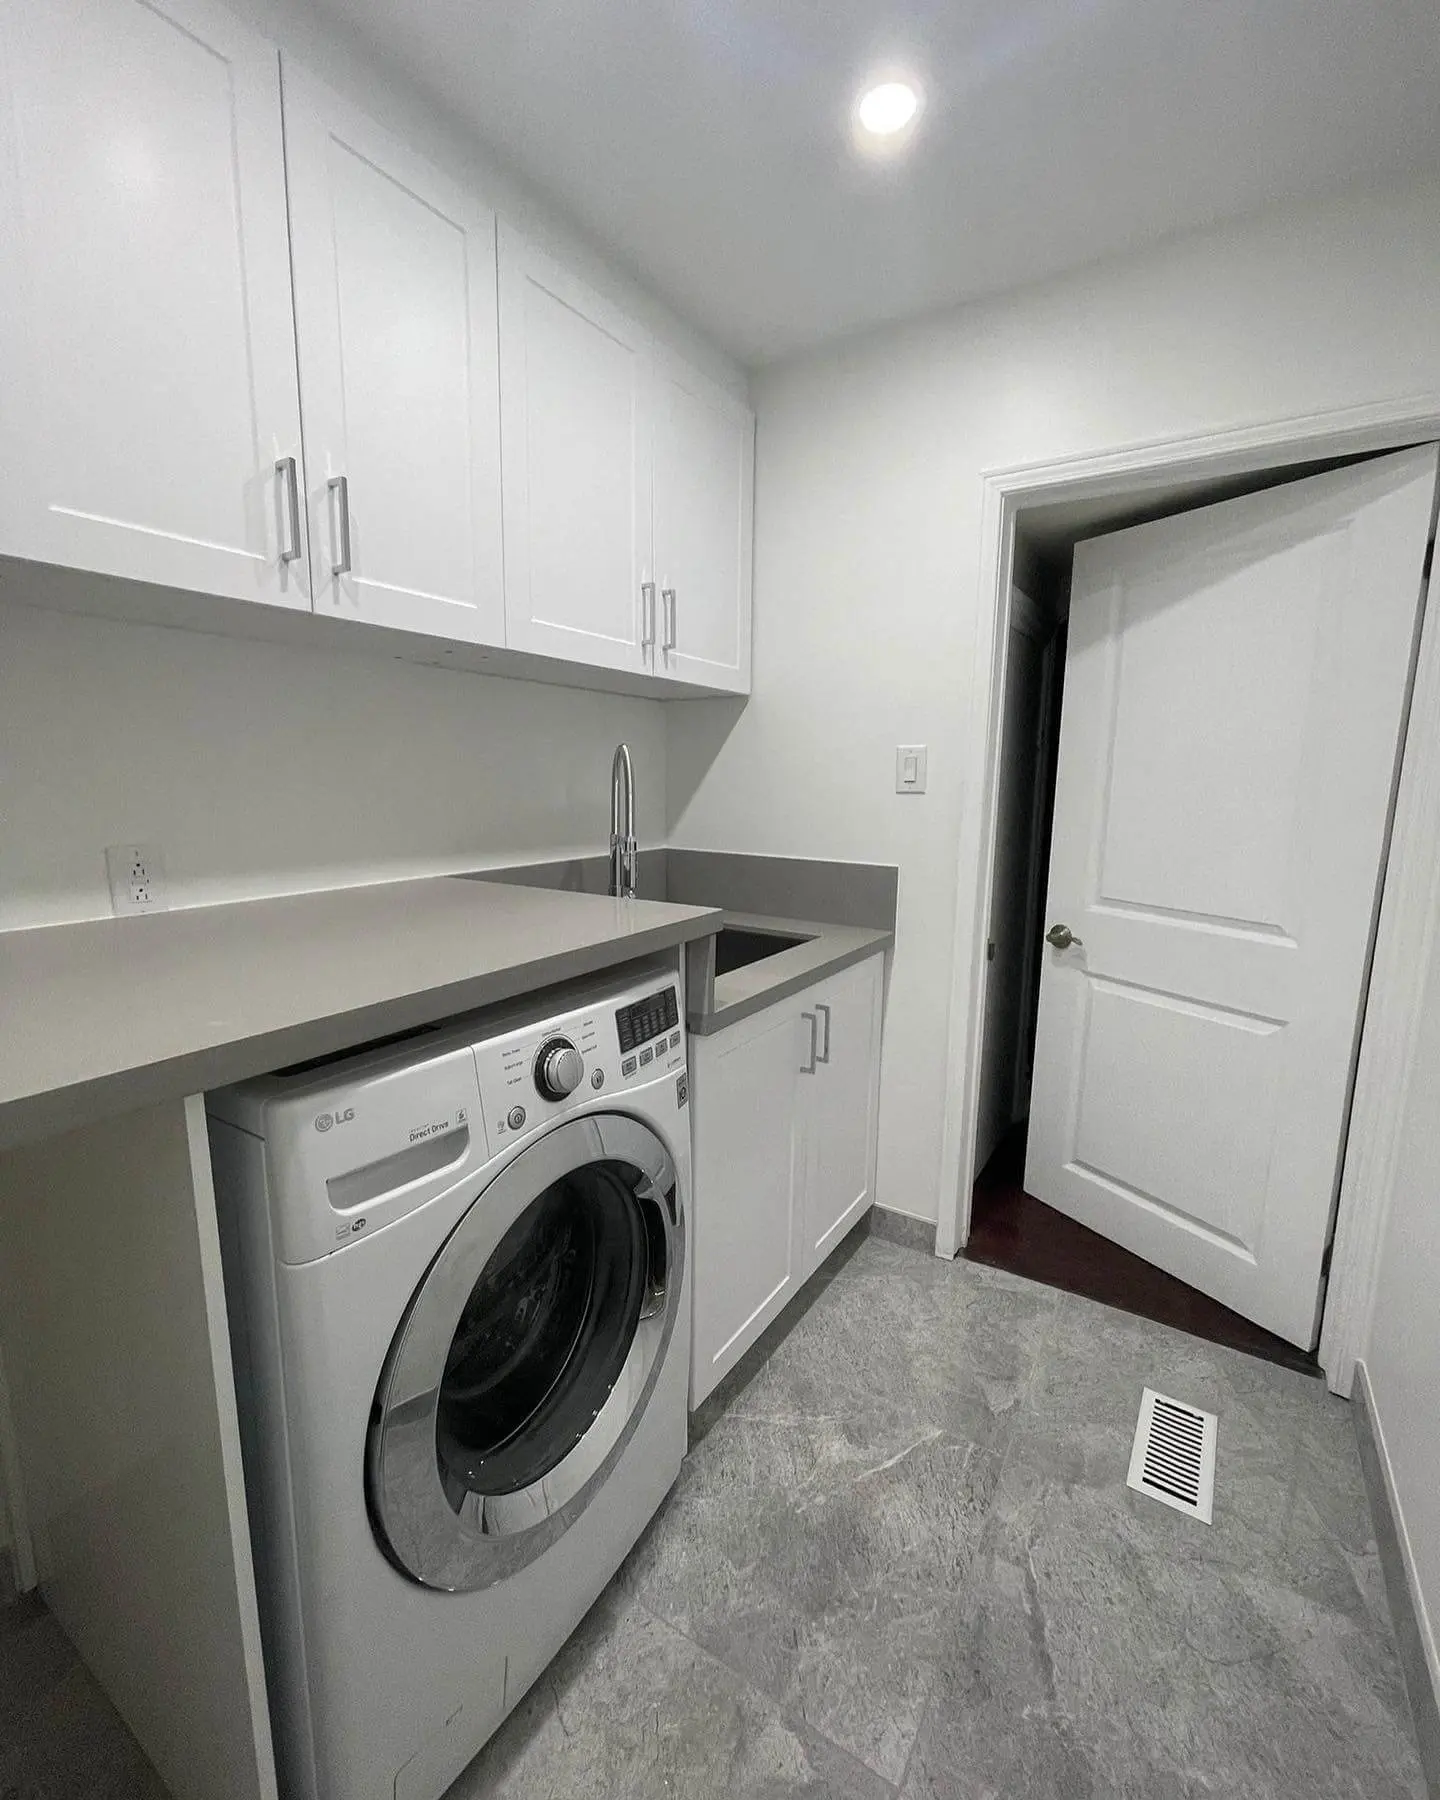 Laundry room in Markham, ON